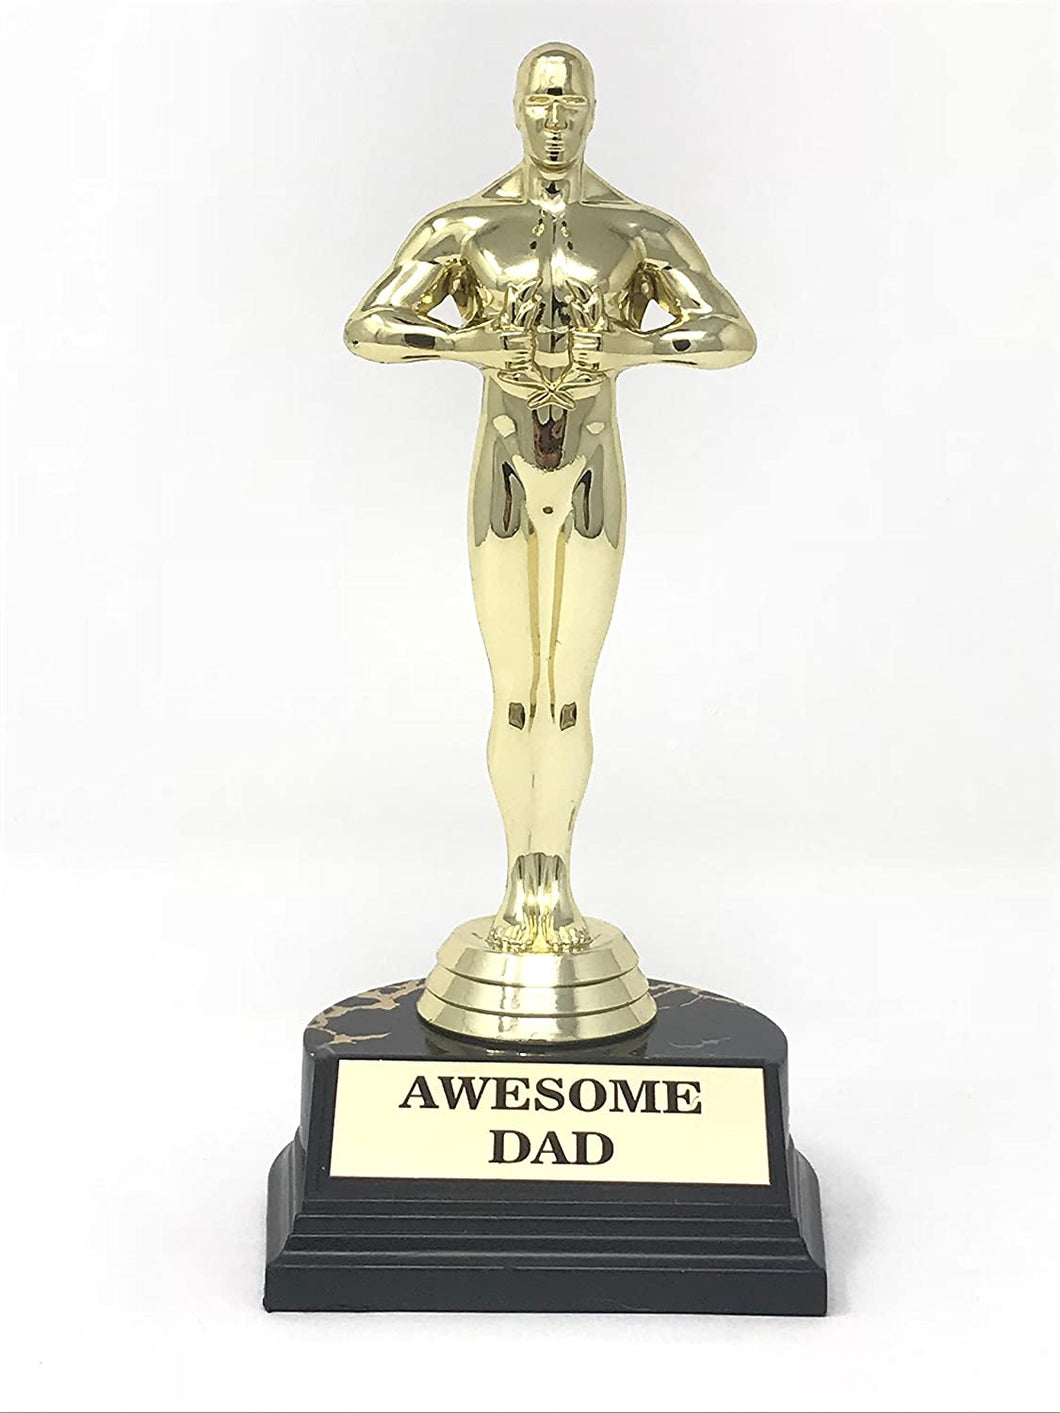 Awesome Dad (7 inches)